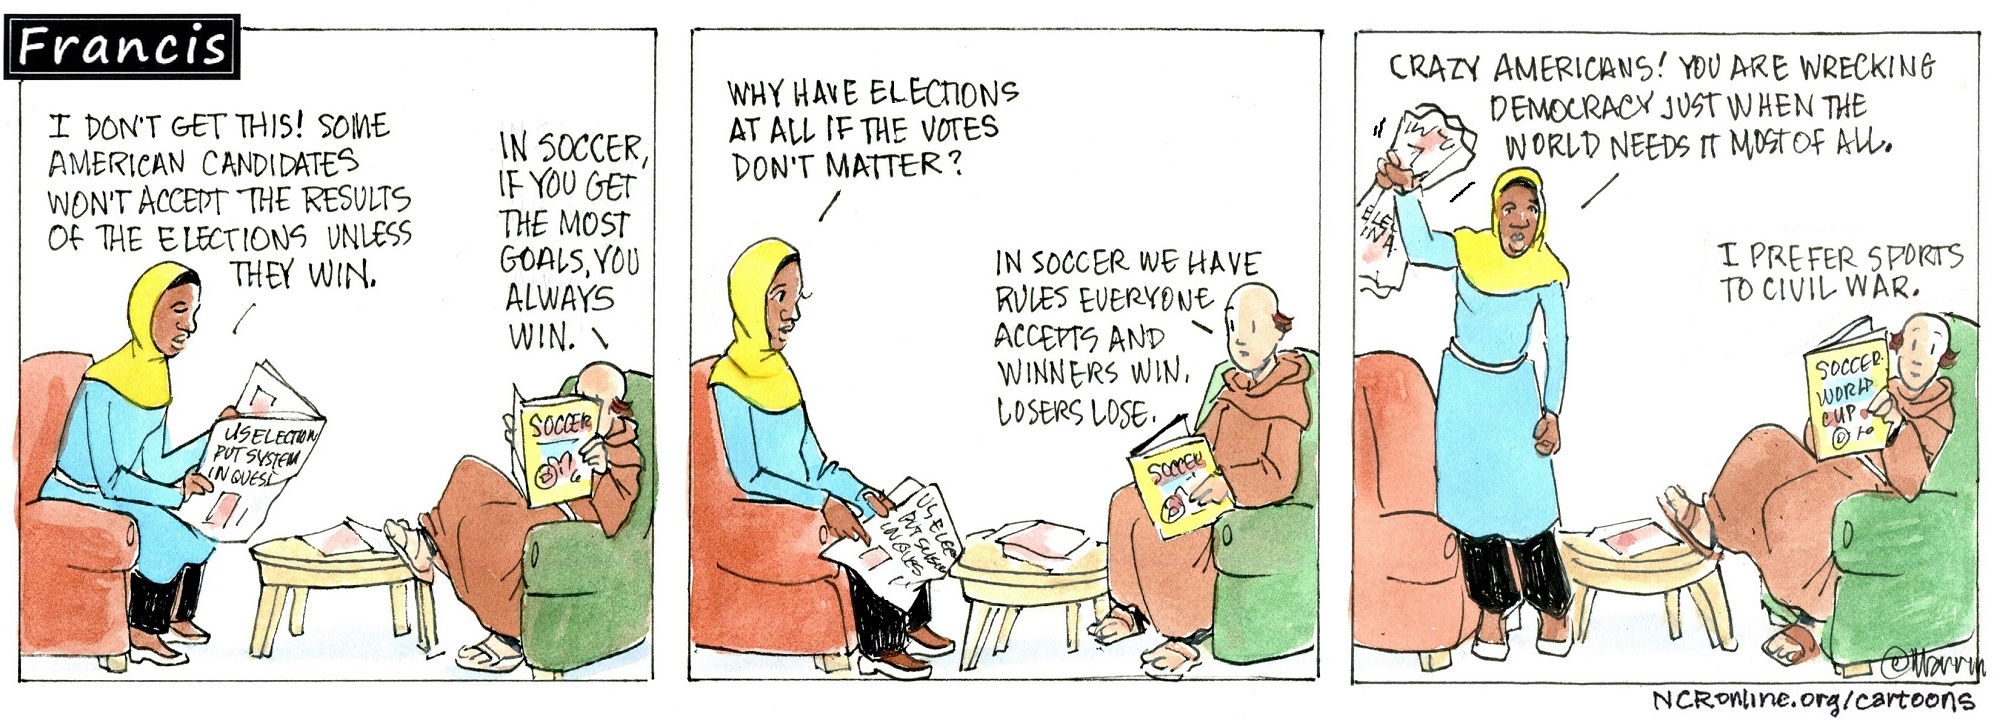 Francis, the comic strip: Some candidates won't accept election results unless they win. As Gabby says: "I don't get this!"